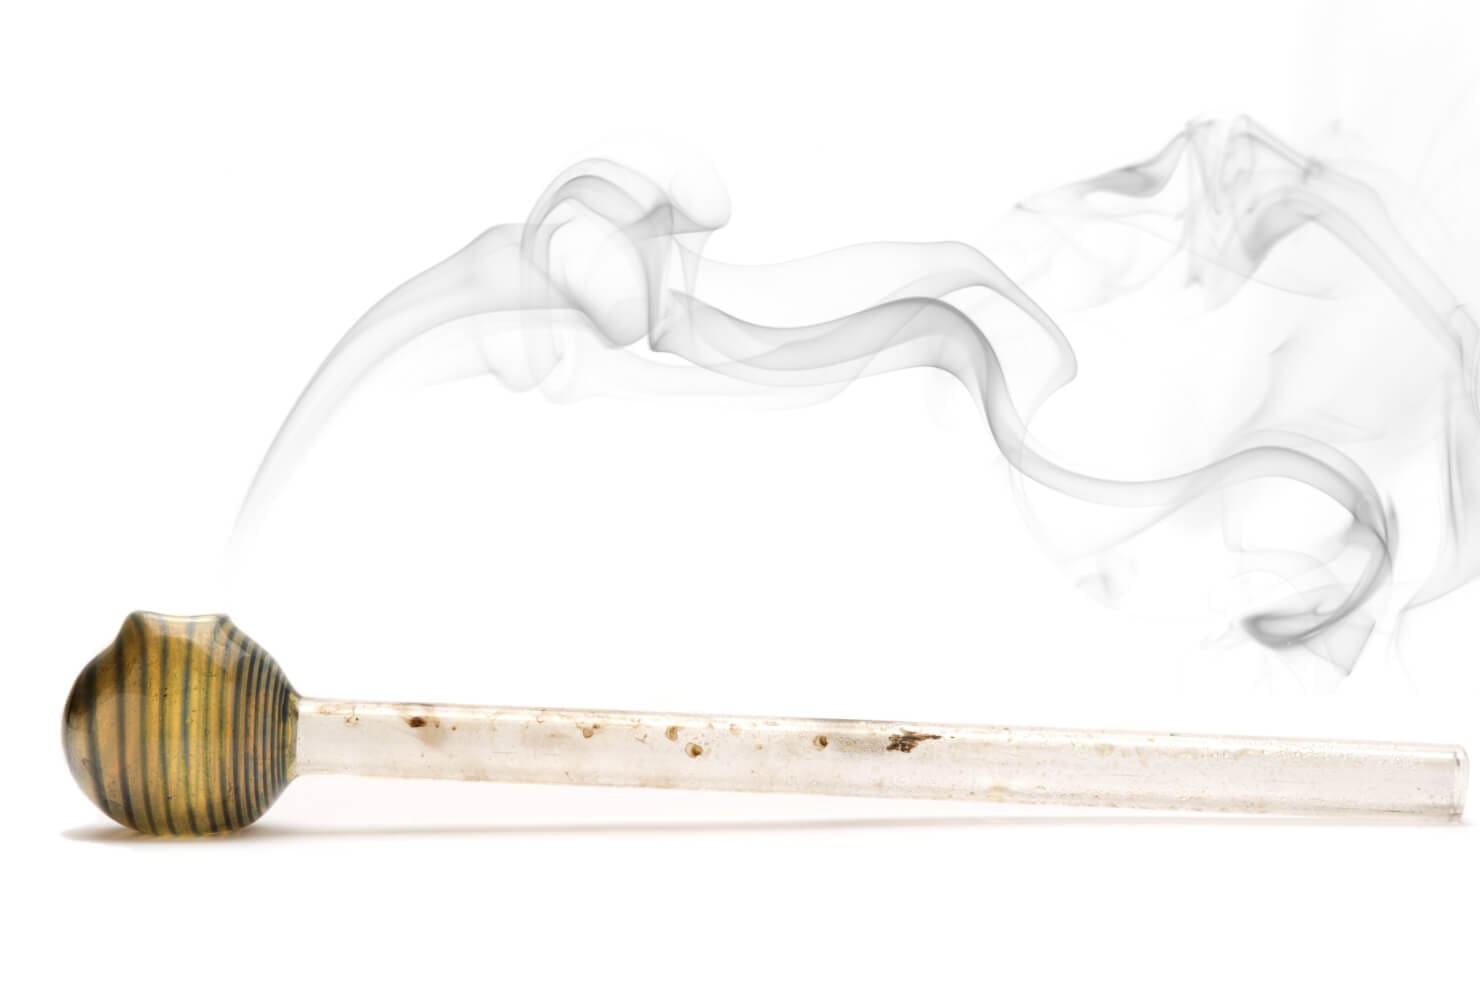 amanda paterson recommends homemade meth pipe pic